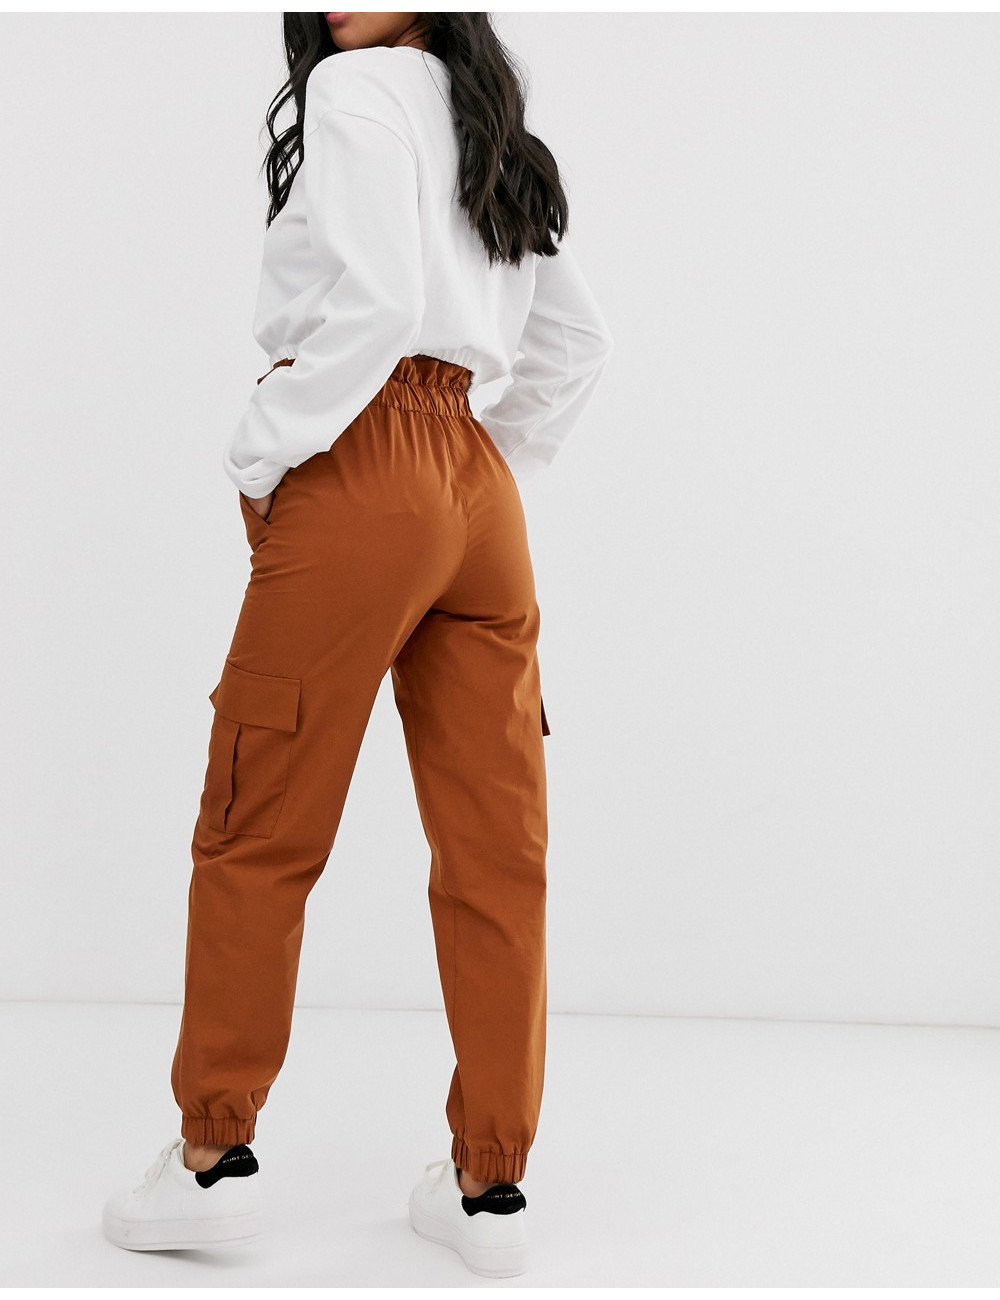 Only Petite cargo trouser...